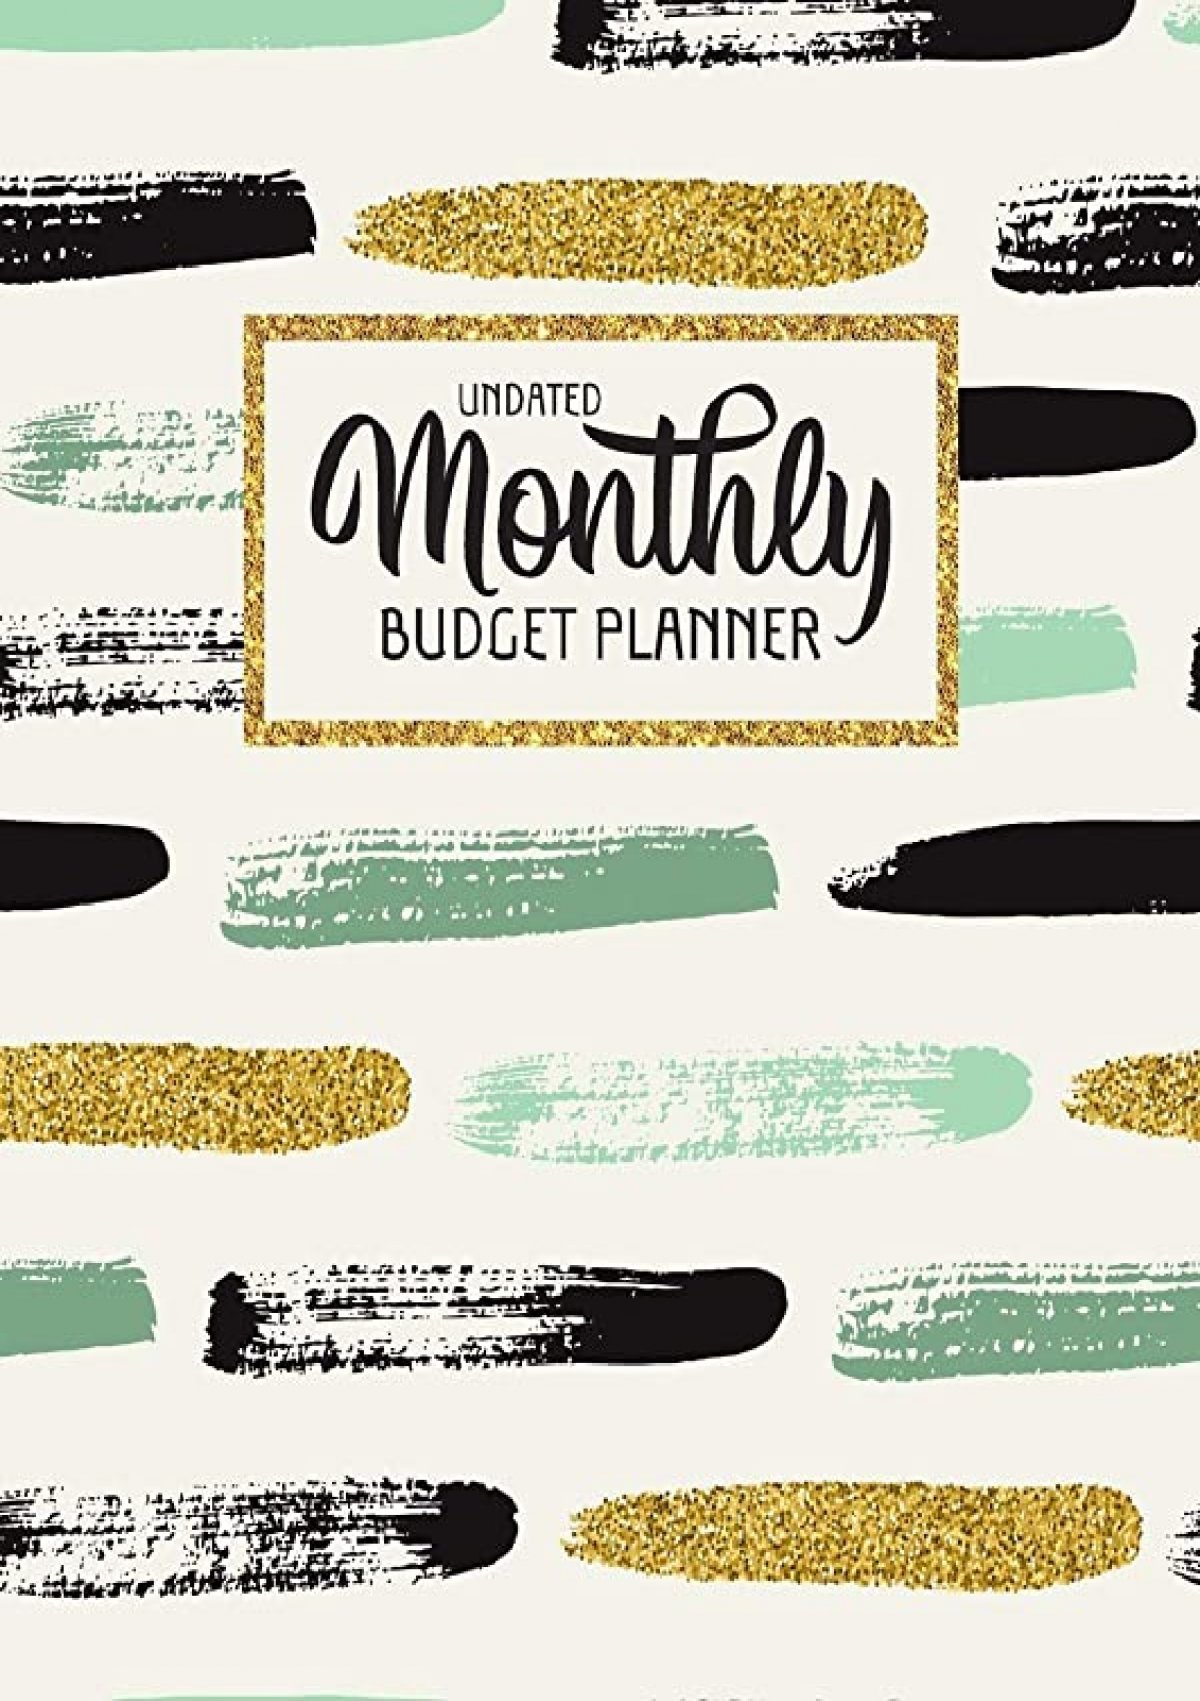 pdf-undated-monthly-budget-planner-large-annual-financial-budget